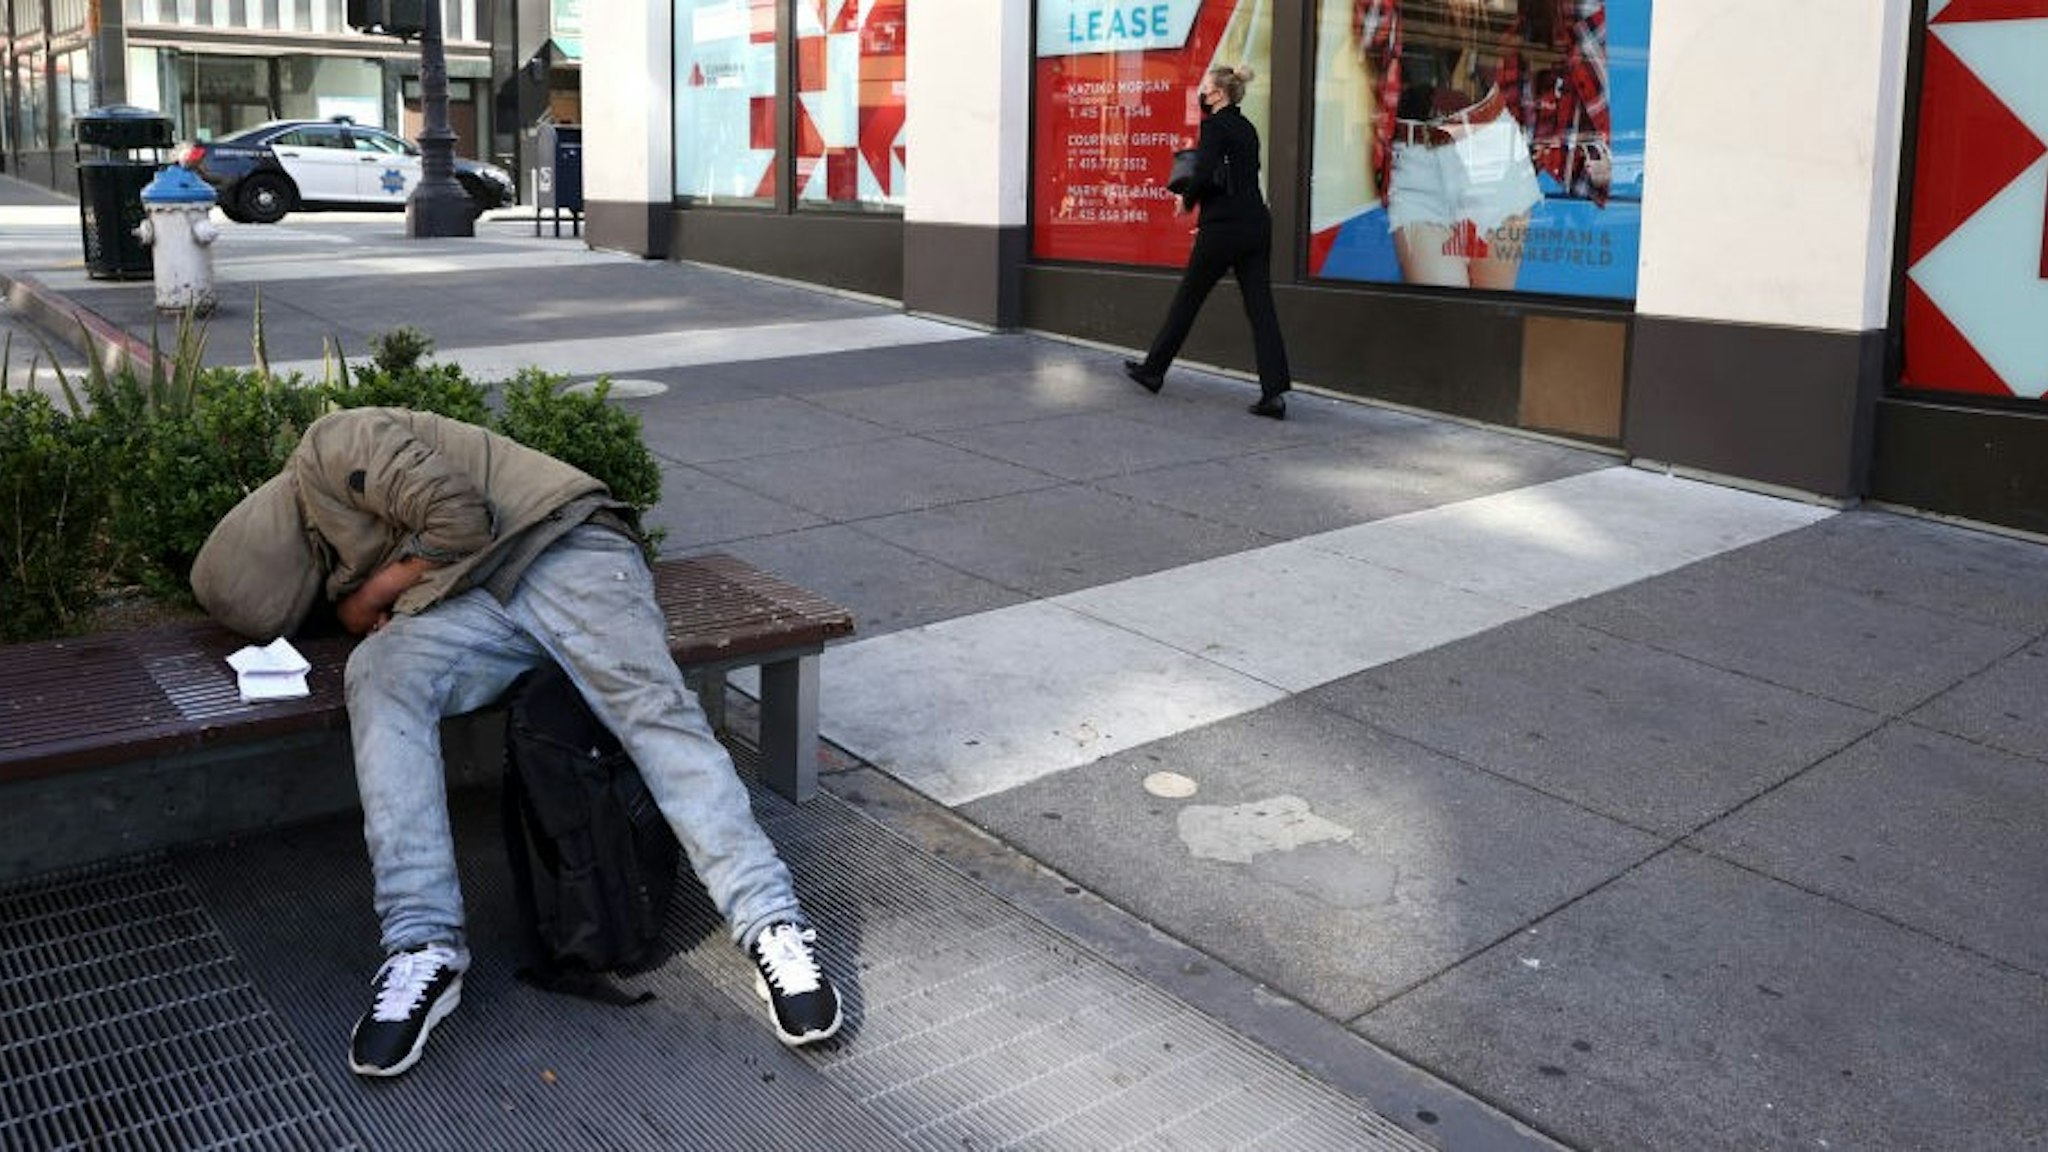 SAN FRANCISCO, CALIFORNIA - APRIL 16: A homeless person sleeps on a bench in front of closed retail stores on April 16, 2021 in San Francisco, California. As San Francisco begins to slowly reopen a year after the city went into lockdown due to theCOVID-19 pandemic, many of the city's businesses have shut their doors forever. San Francisco mayor London Breed is asking San Franciscans to patronize local businesses for the next 30 days as she pushes to prioritize small businesses. (Photo by